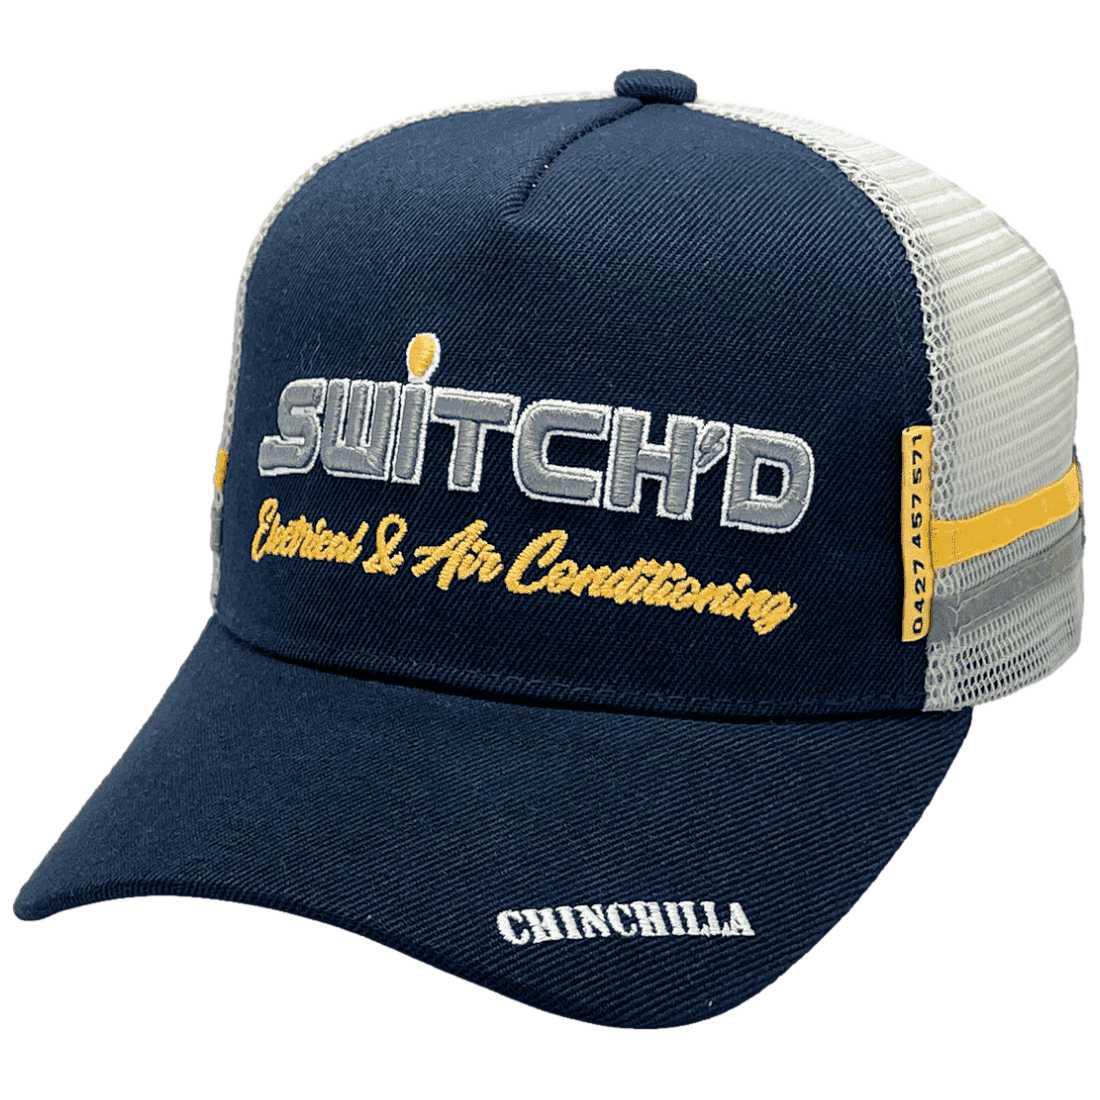 Switchd Electrical & Air Conditioning Cairns Qld LP Midrange Aussie Trucker Hat with 2 Side Bands